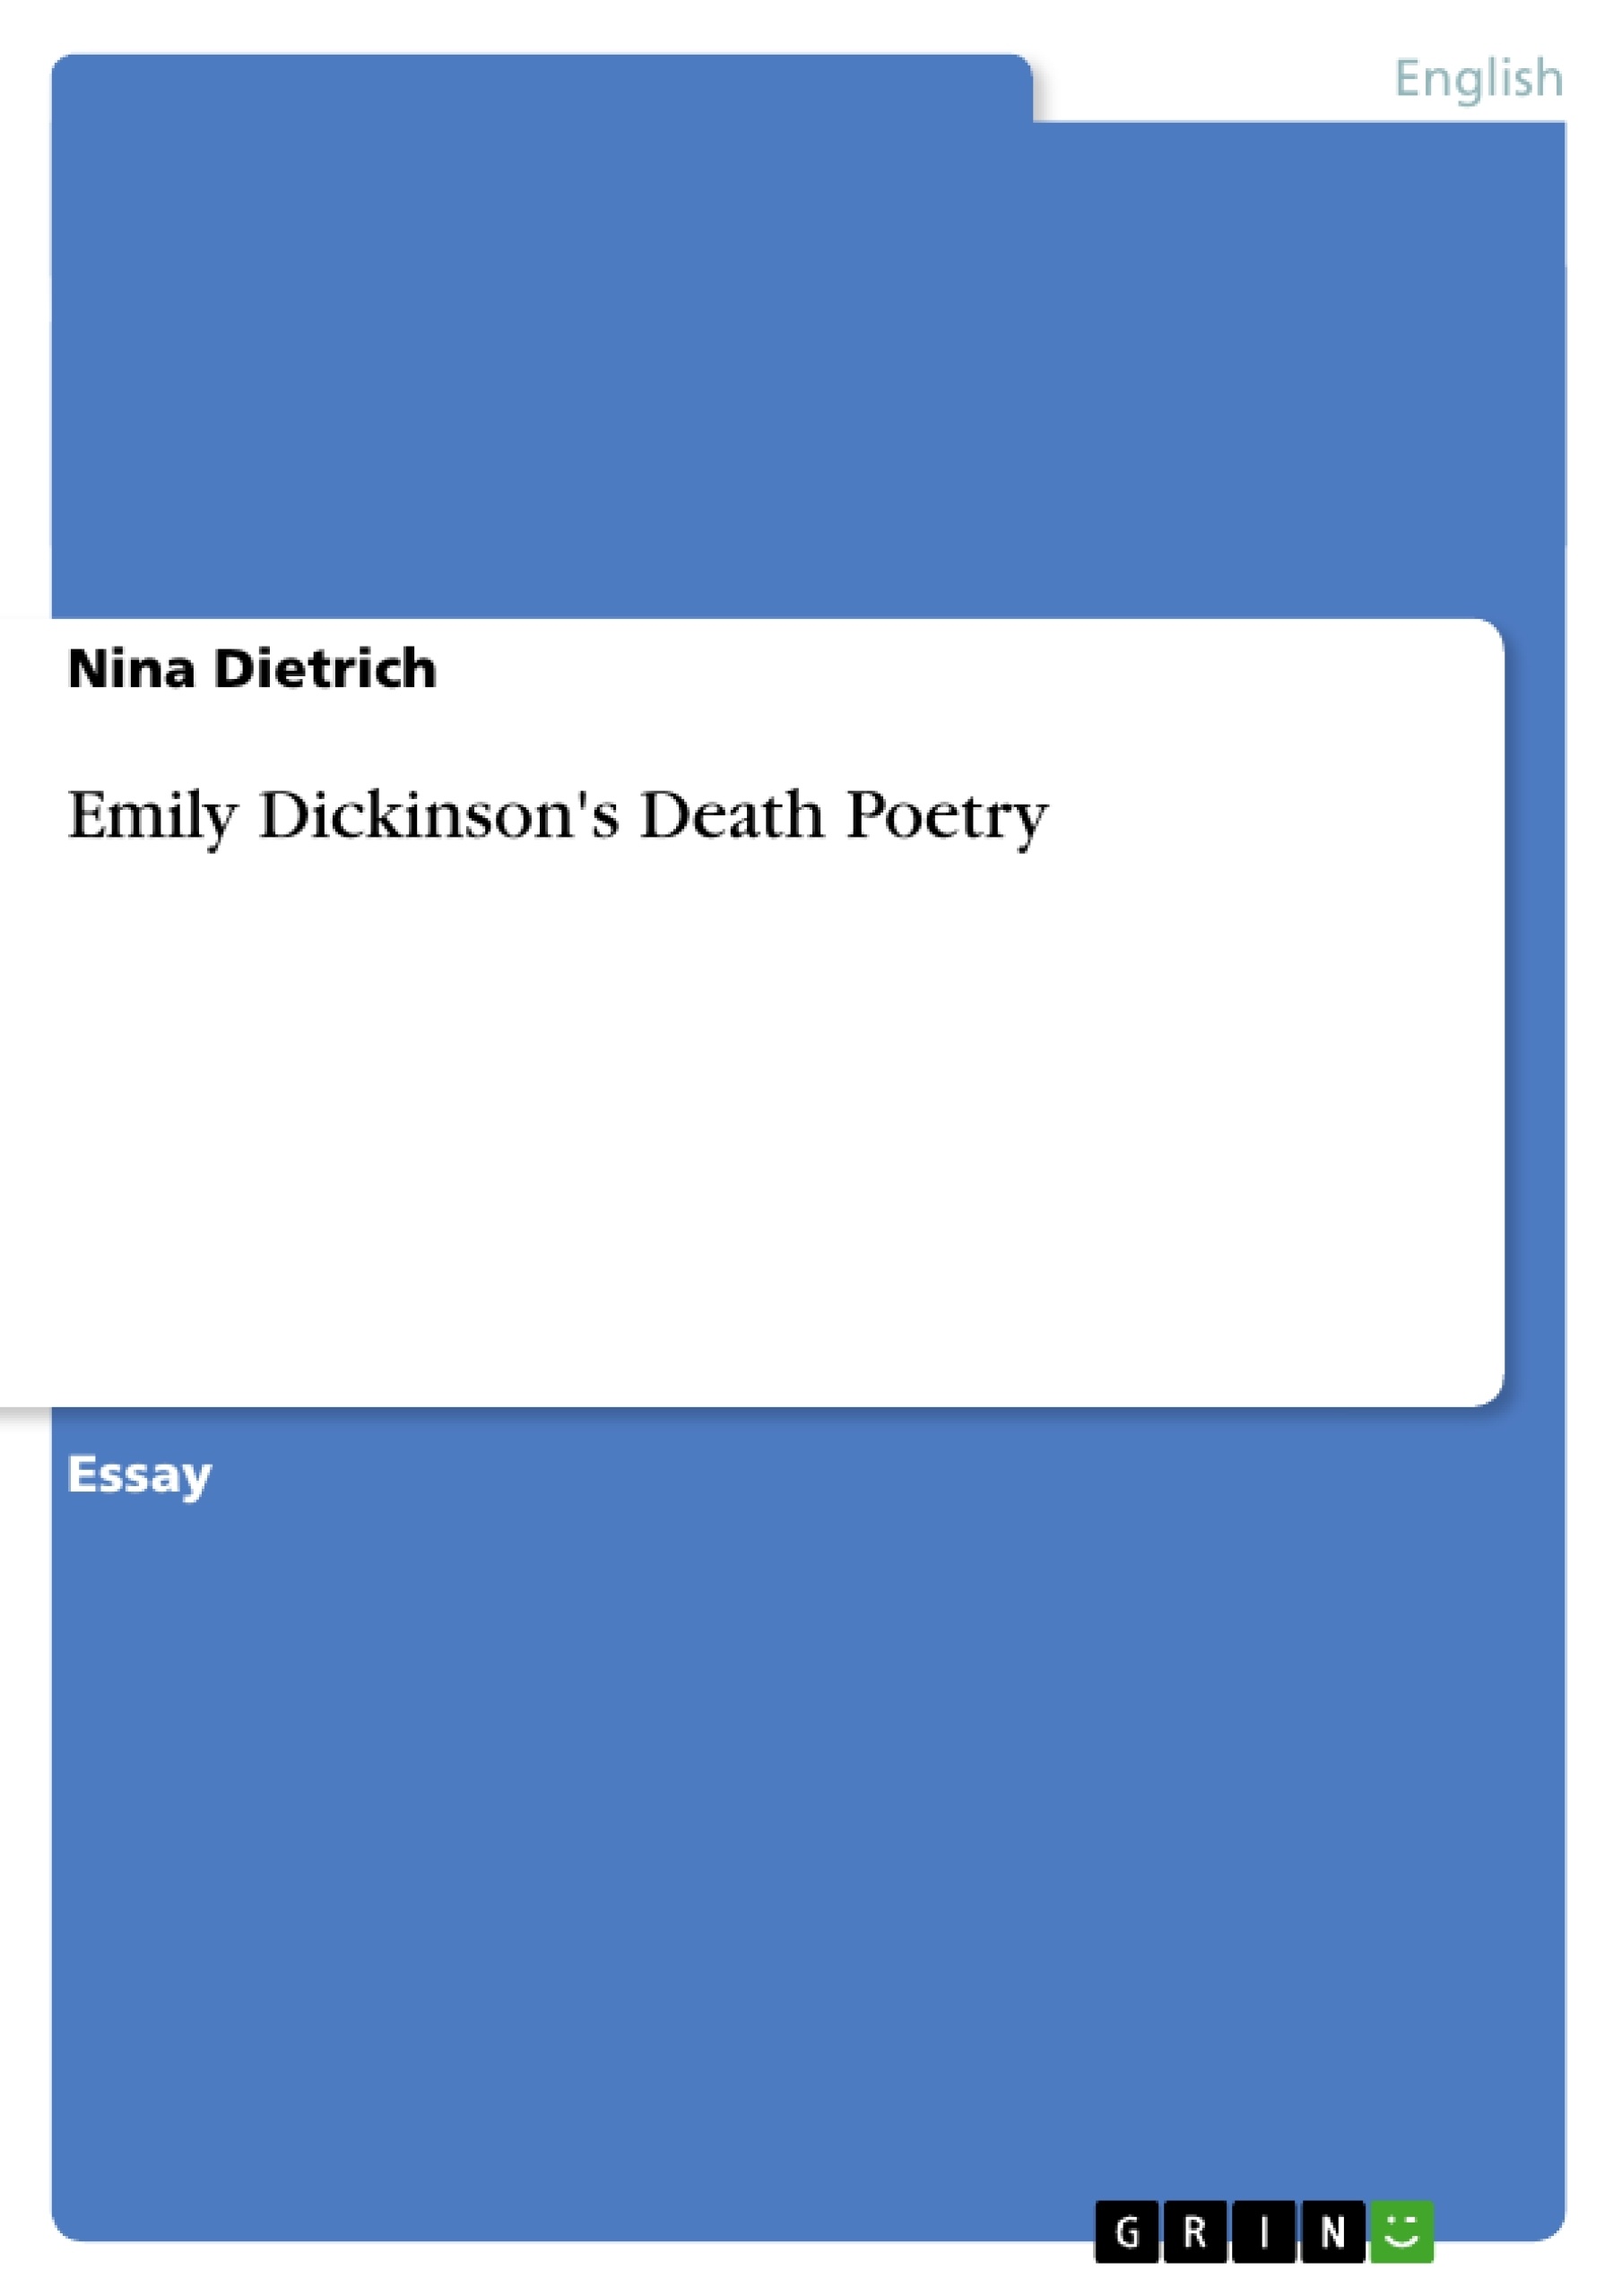 the last night that she lived emily dickinson summary